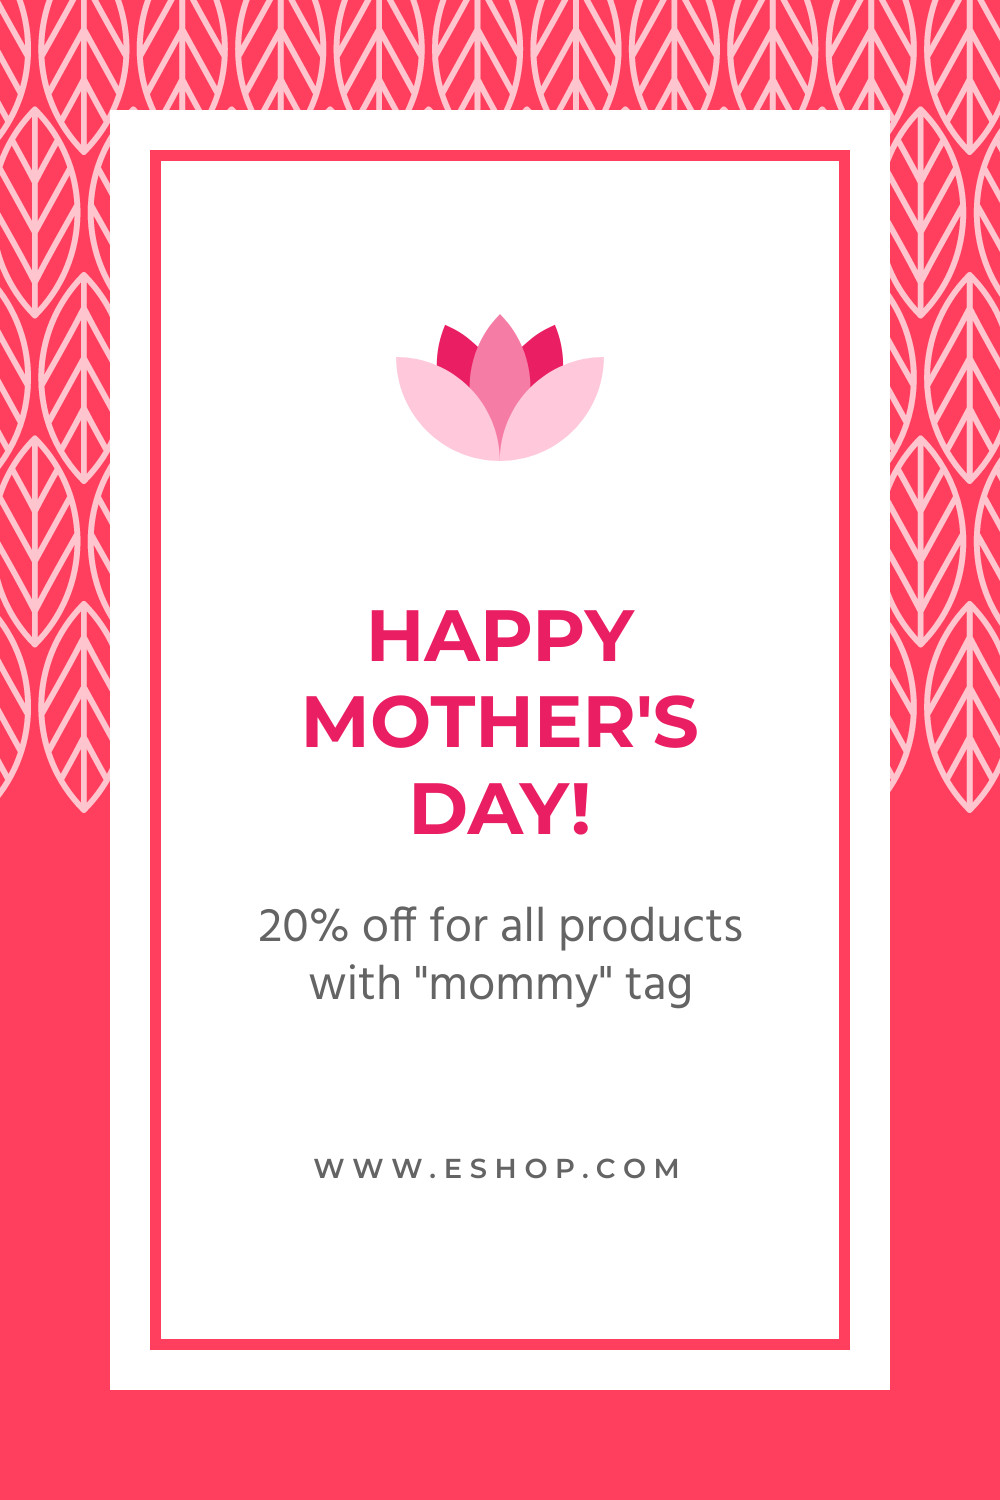 Red Mother's Day Sale Leaf Pattern Facebook Cover 820x360